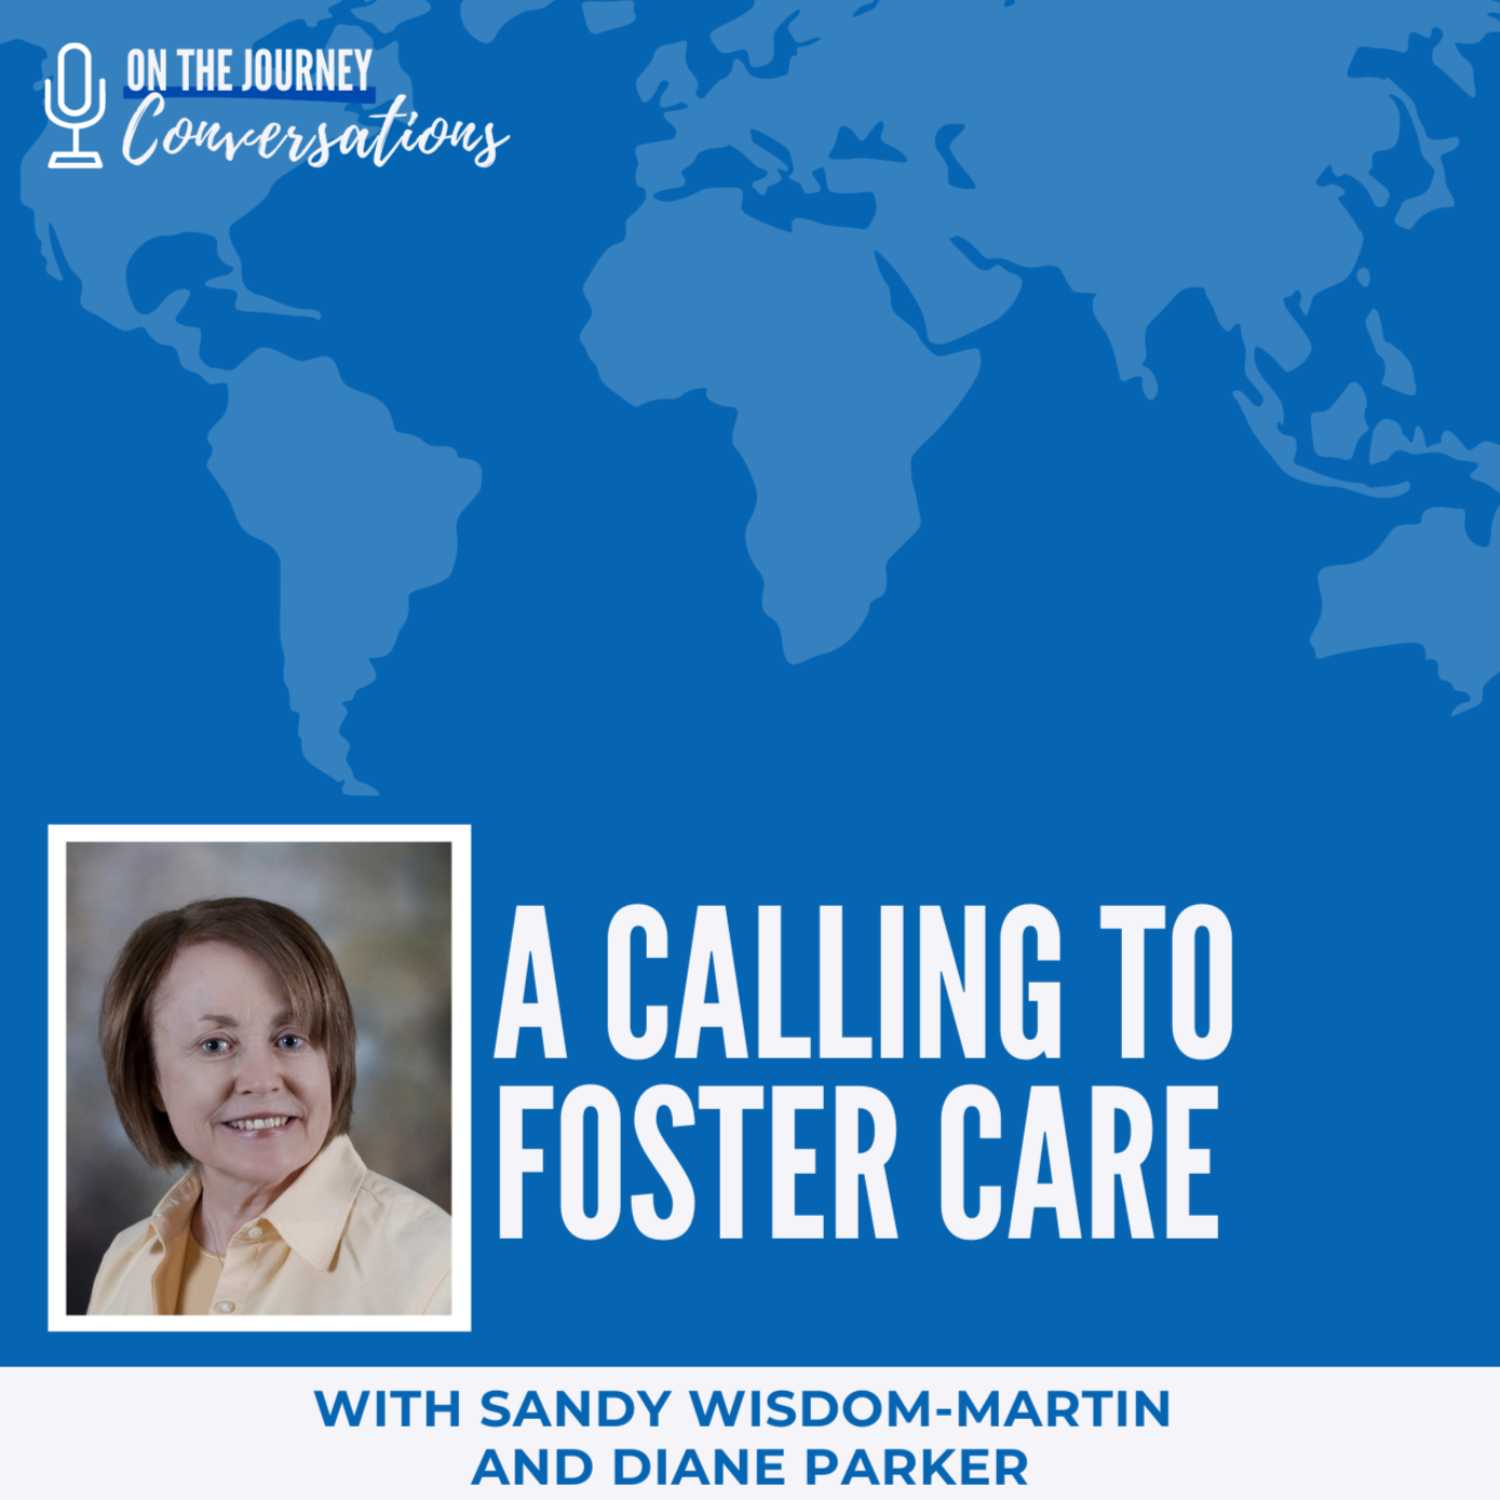 A Calling to Foster Care